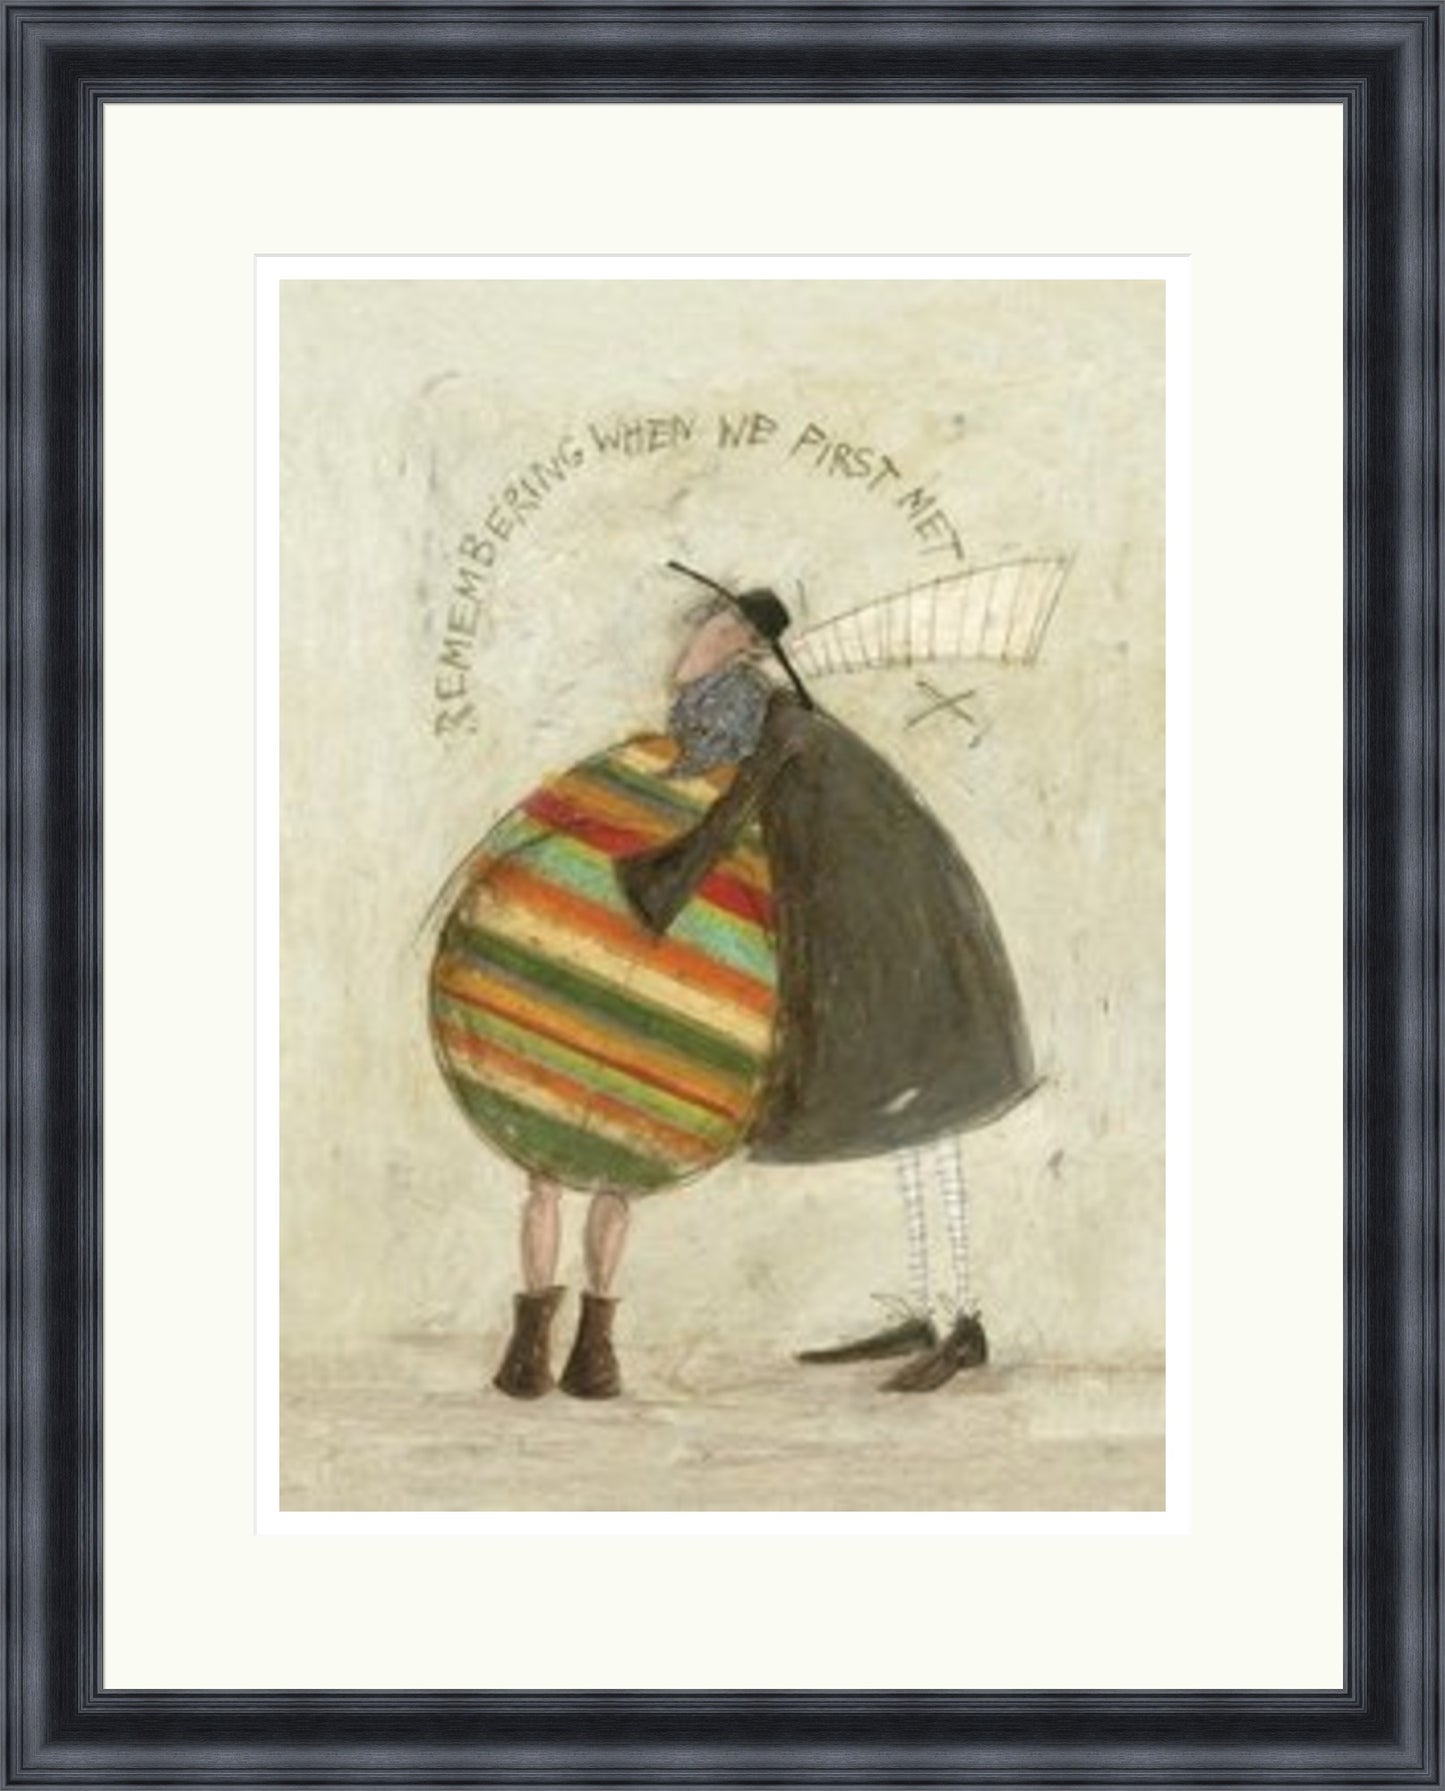 Remembering When We First Met by Sam Toft